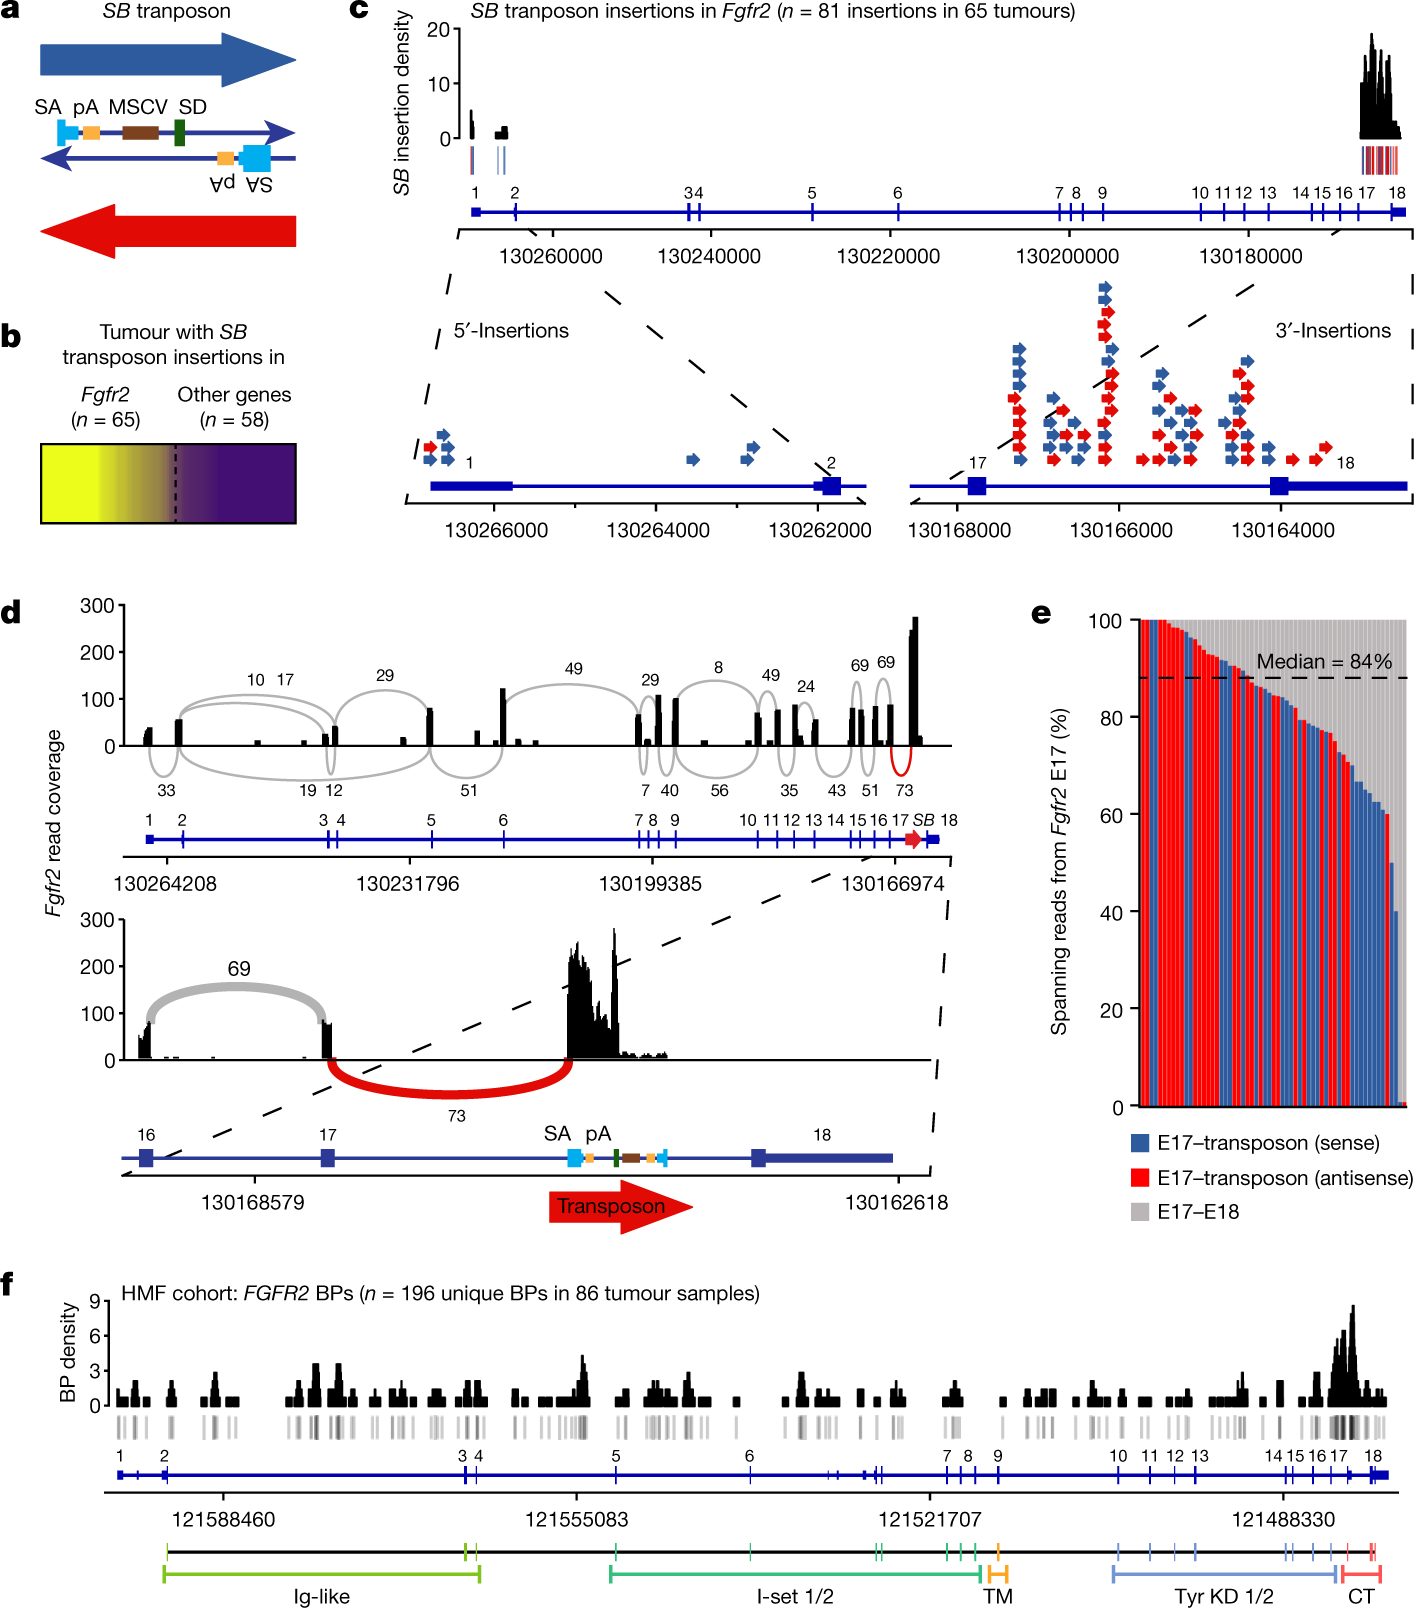 Truncated FGFR2 is a clinically actionable oncogene in multiple cancers |  Nature